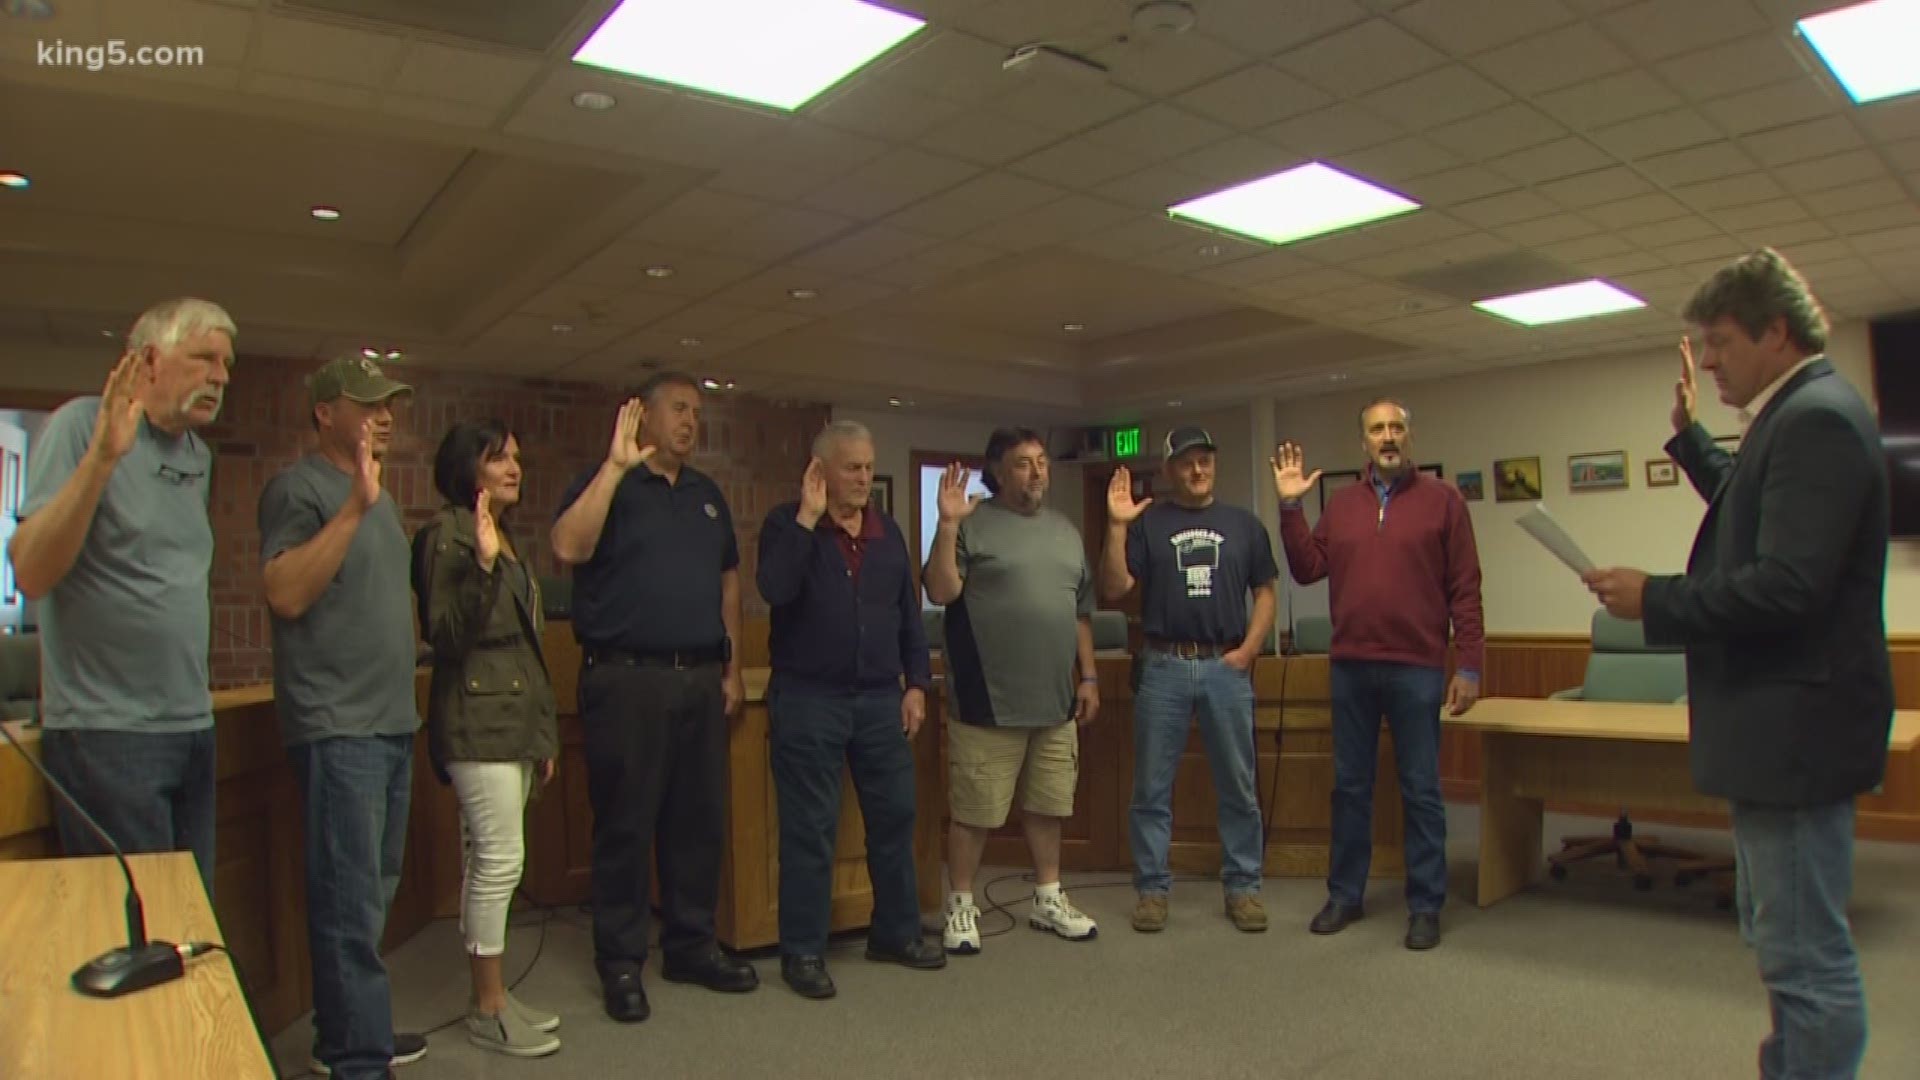 The King County Council appointed nine new commissioners following a KING 5 Investigation that exposed an Enumclaw official's alleged theft of public money.